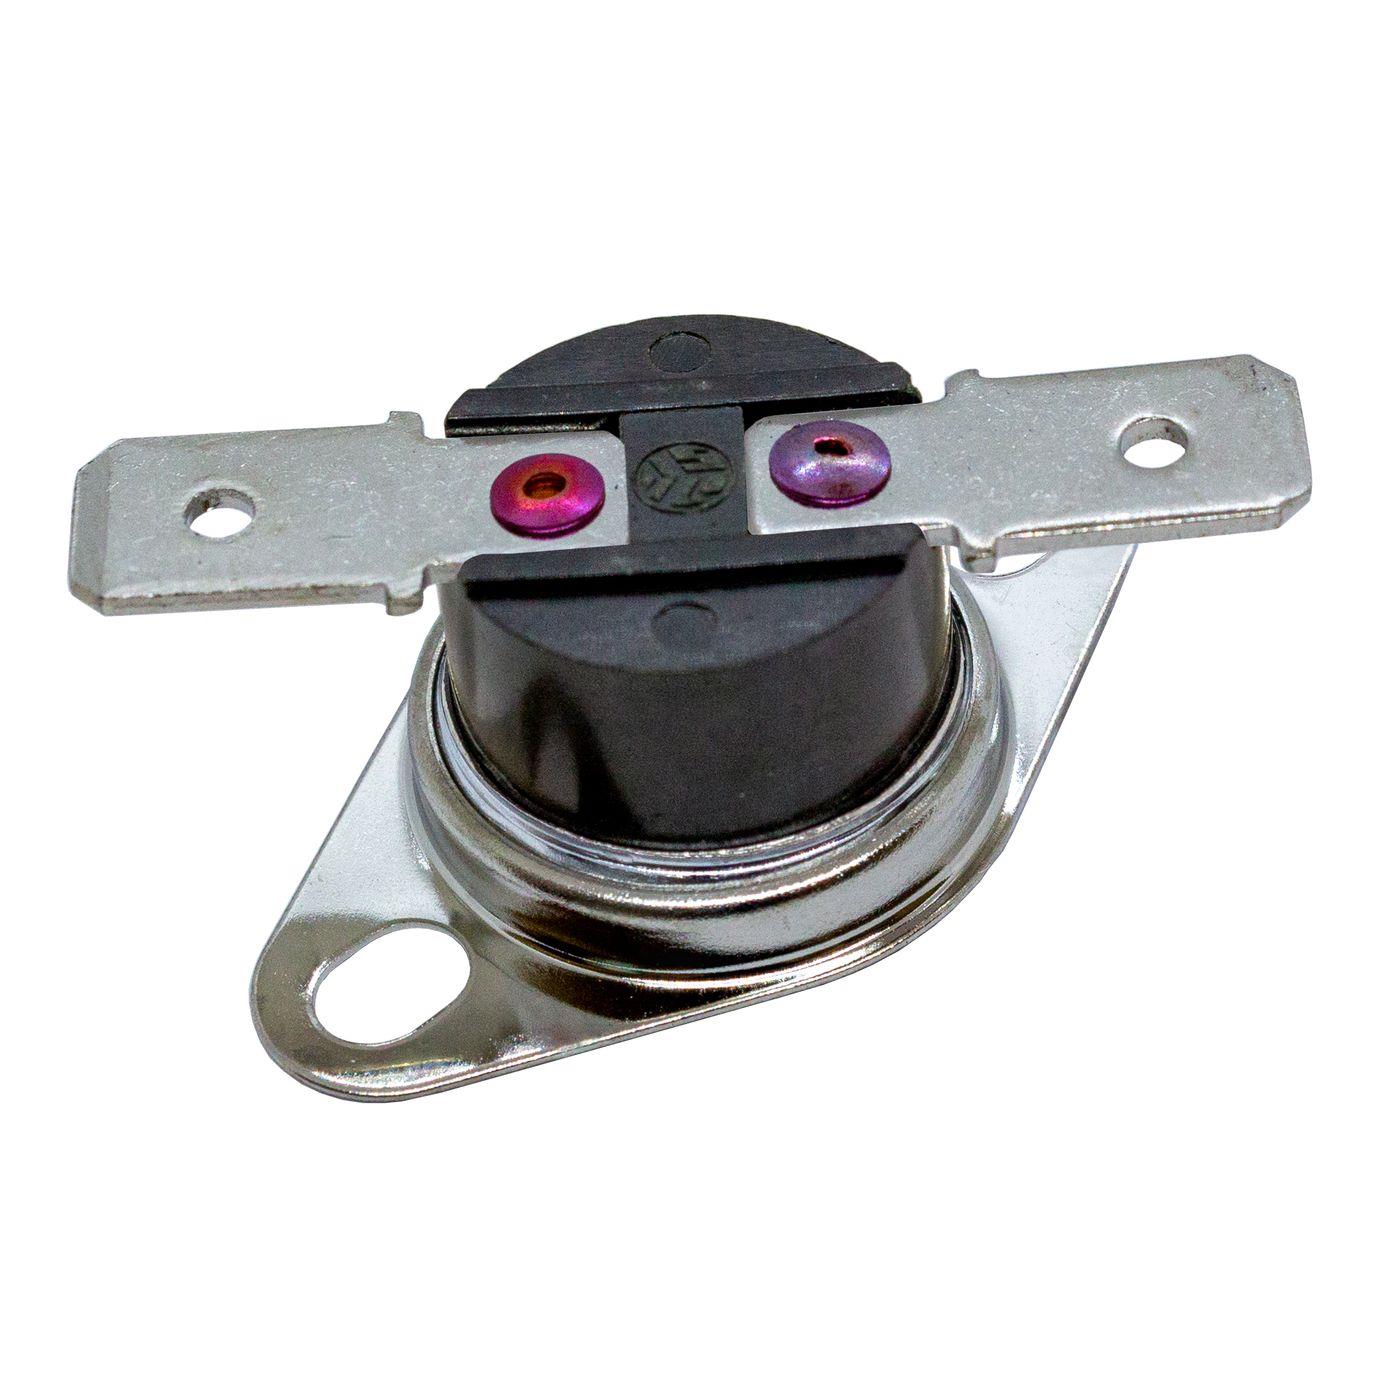 Thermal switch 50°C NO contact 250V 10A Temperature switch thermostat KSD301 Bimetal Thermal protection